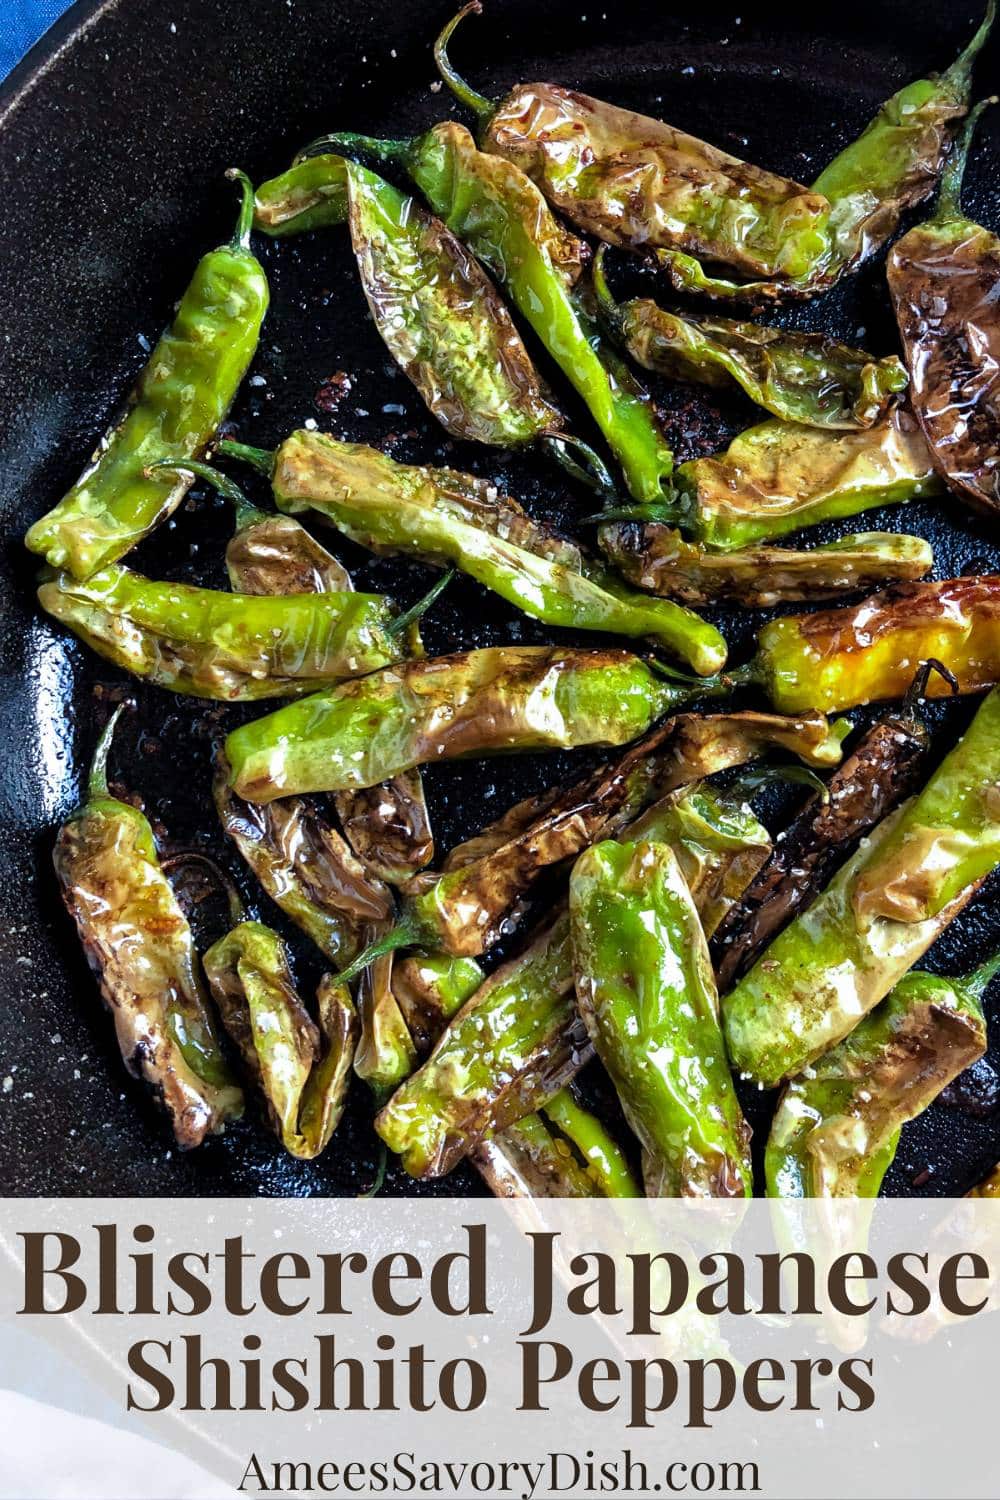 This Japanese Shishito Peppers Recipe is the perfect easy appetizer or snack. Blistered in a cast iron skillet and seasoned with soy sauce, citrus, and salt. via @Ameessavorydish